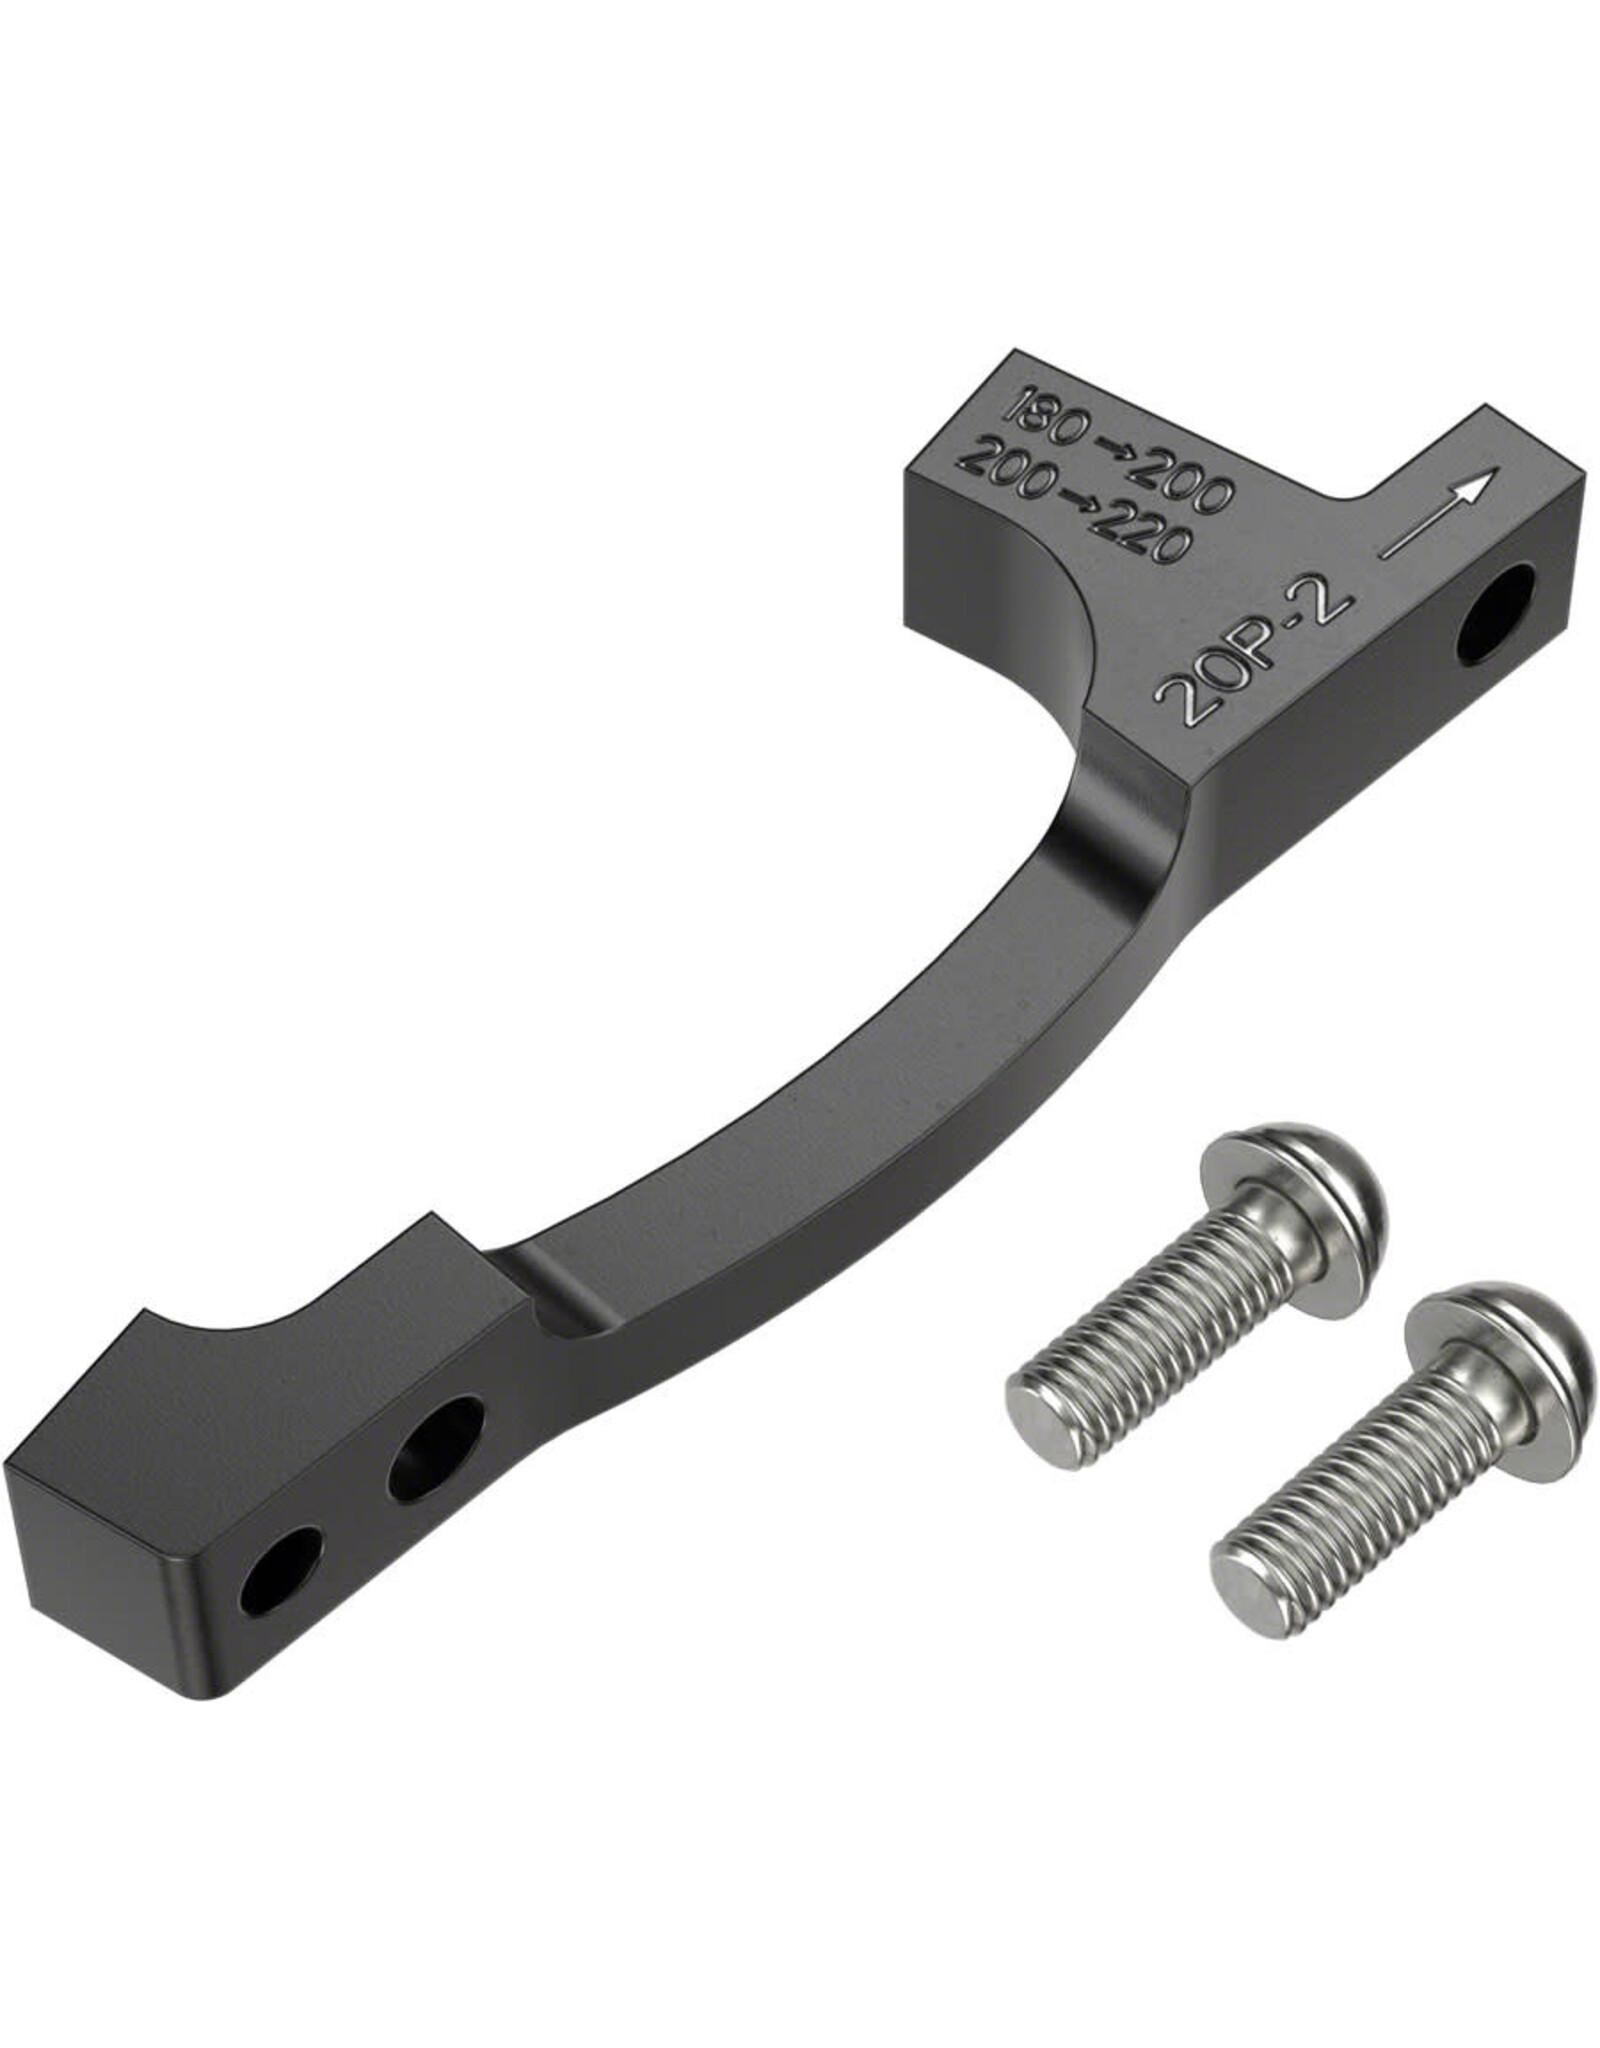 SRAM SRAM Post Bracket 20 P 2 Disc Brake Adaptor -  For 200mm and 220mm Rotors Only, Includes Bracket and Stainless Steel Bolts